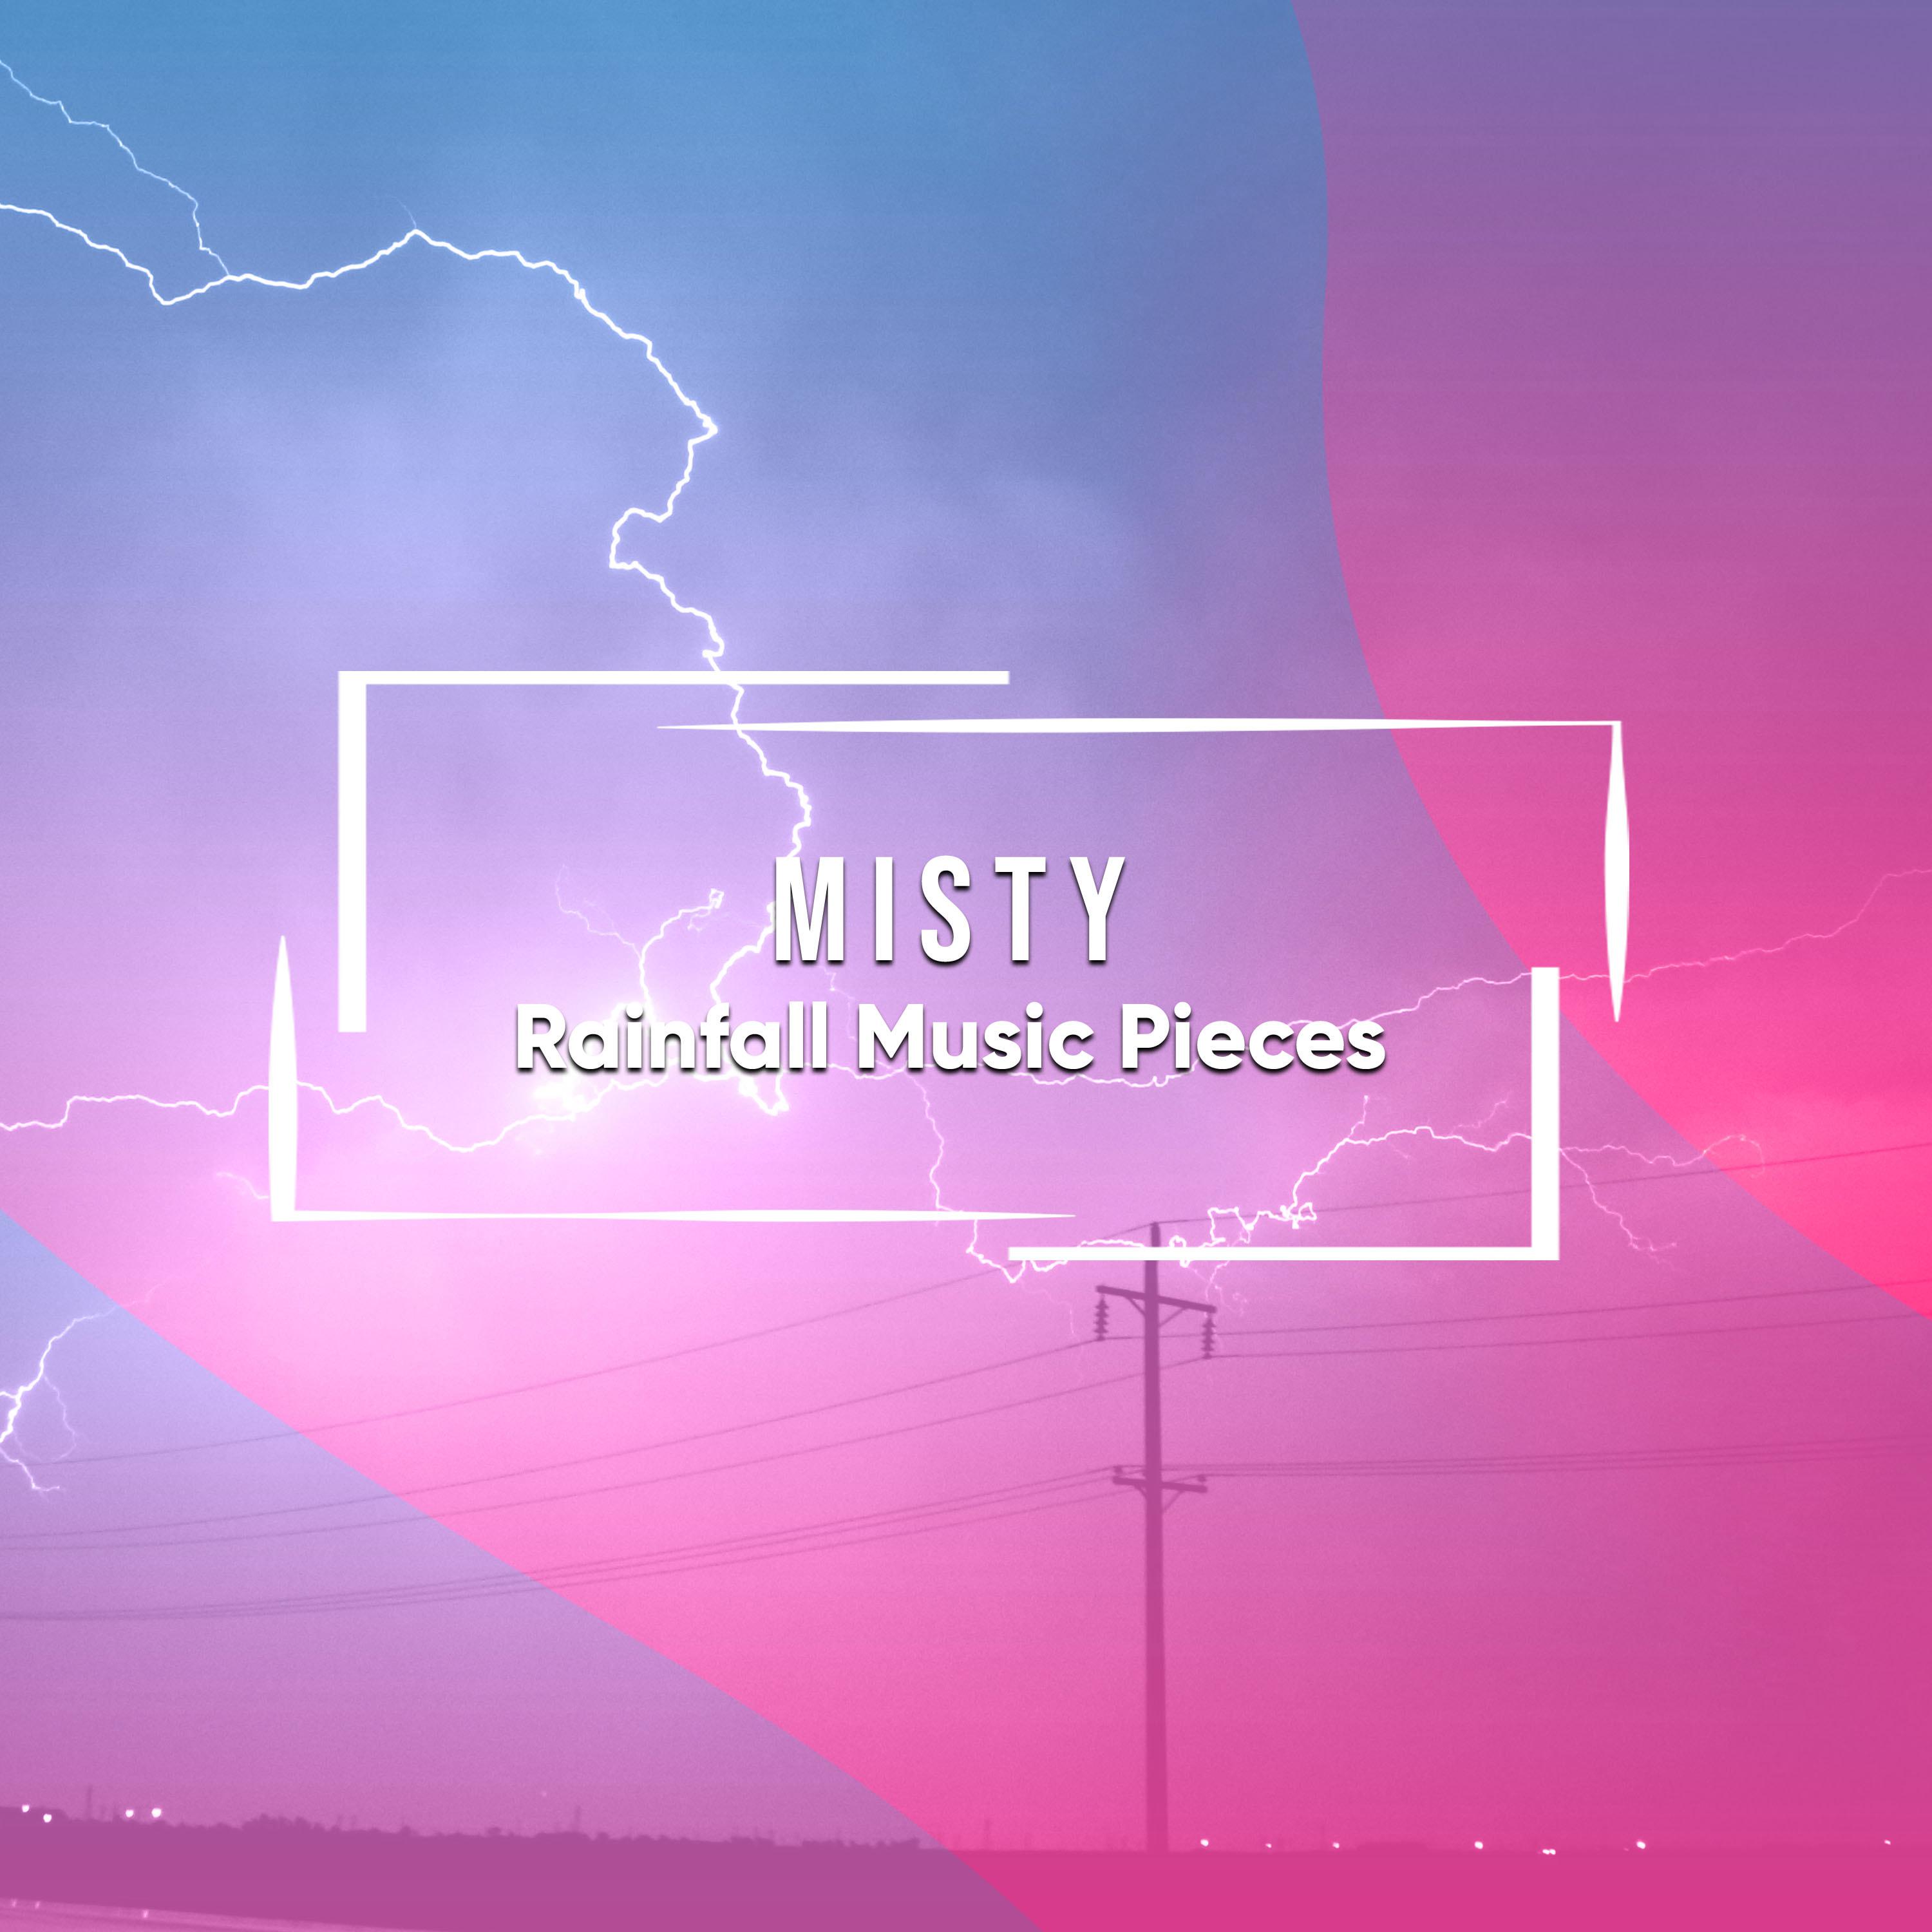 #1 Hour of Misty Rainfall Music Pieces